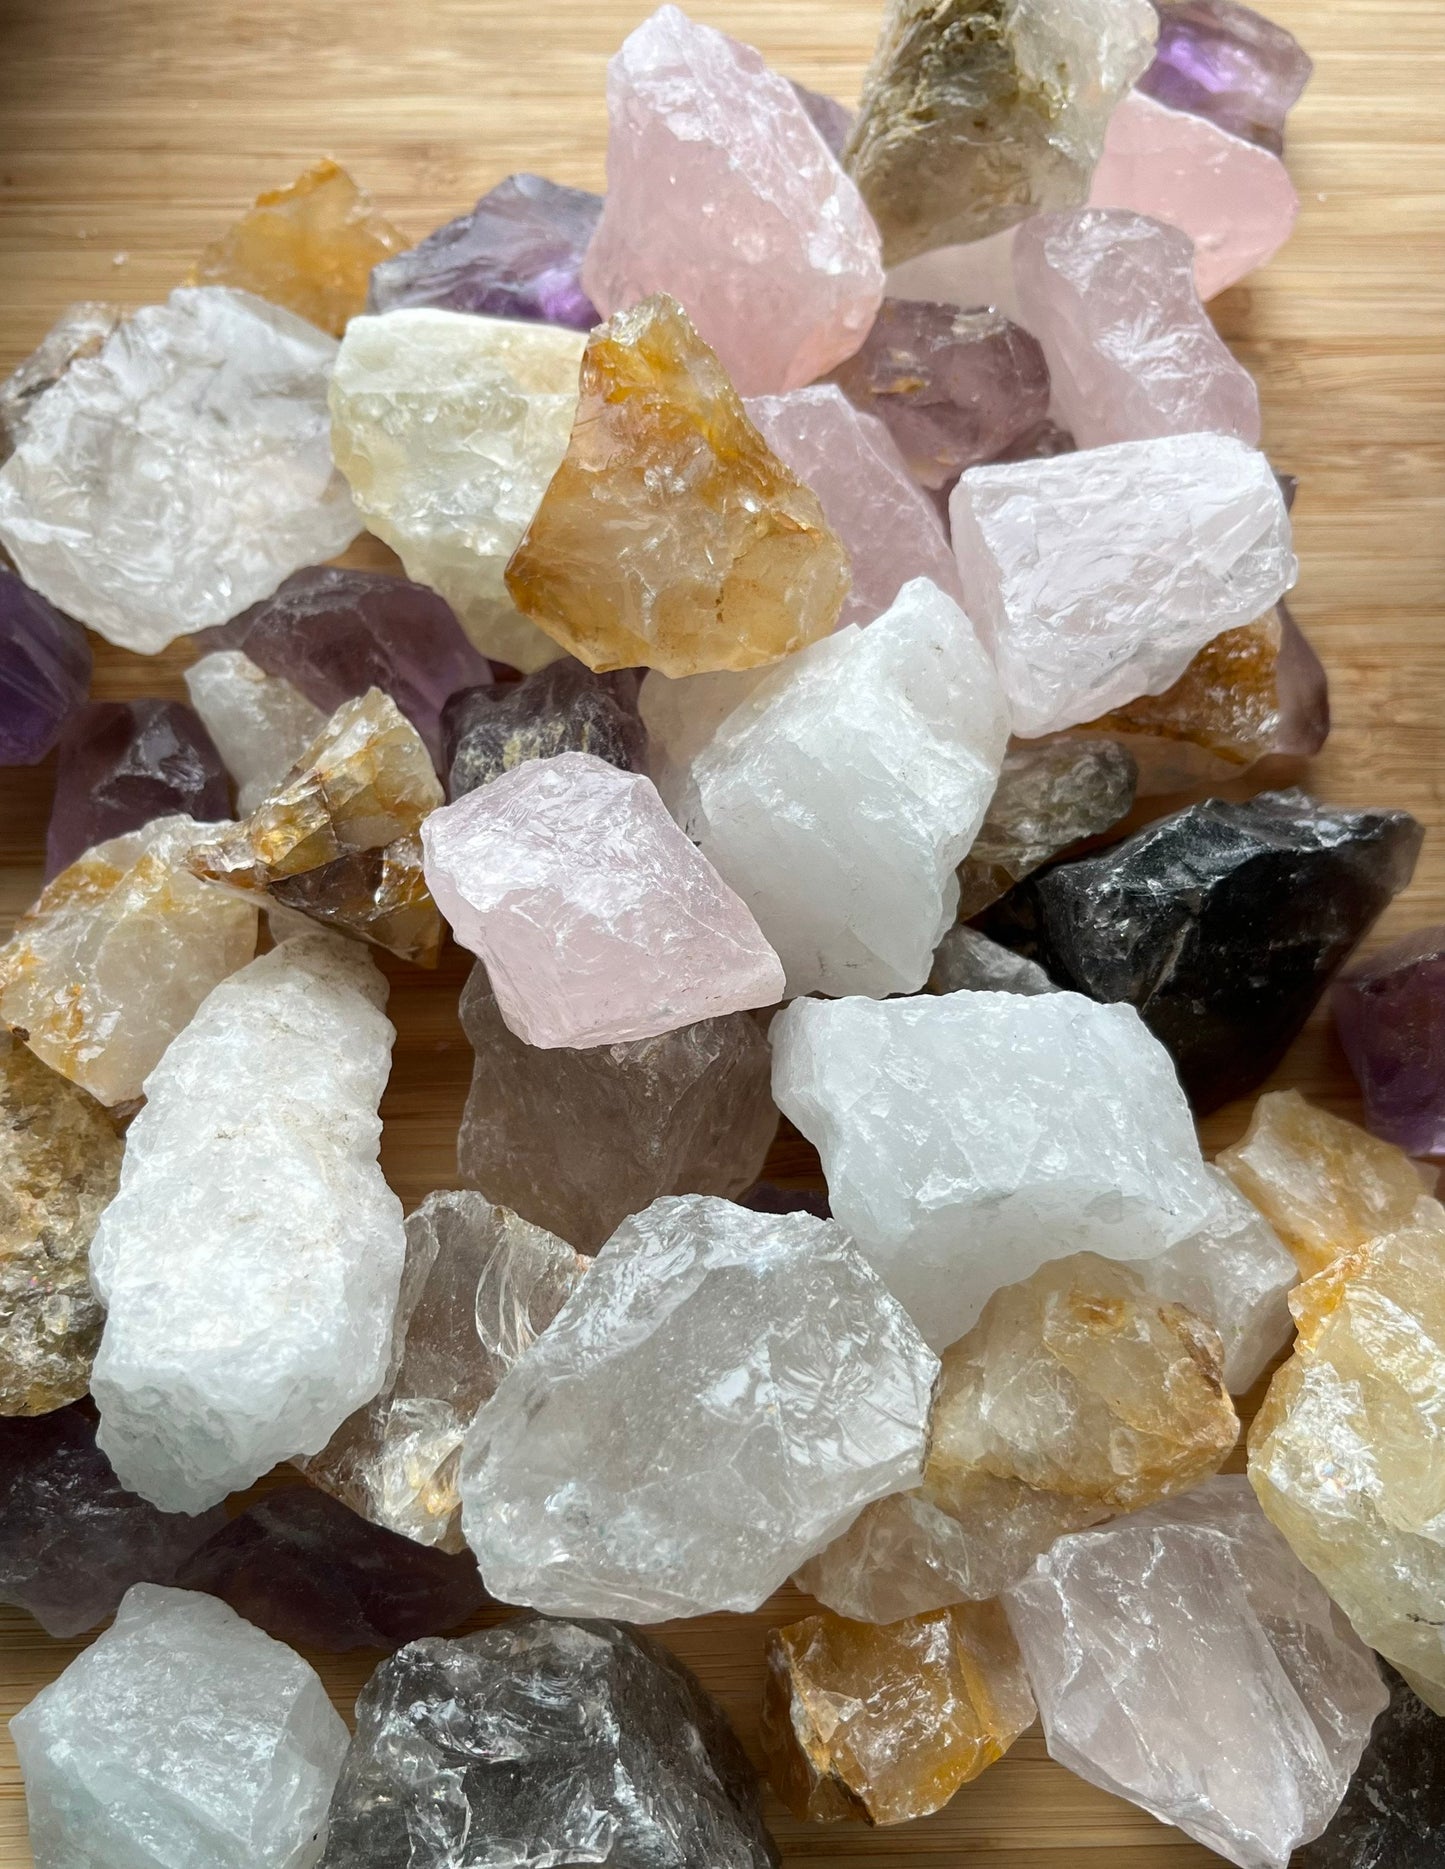 Quartz rough stone mix for tumbling or display, colorful tumbling rough, shipping included